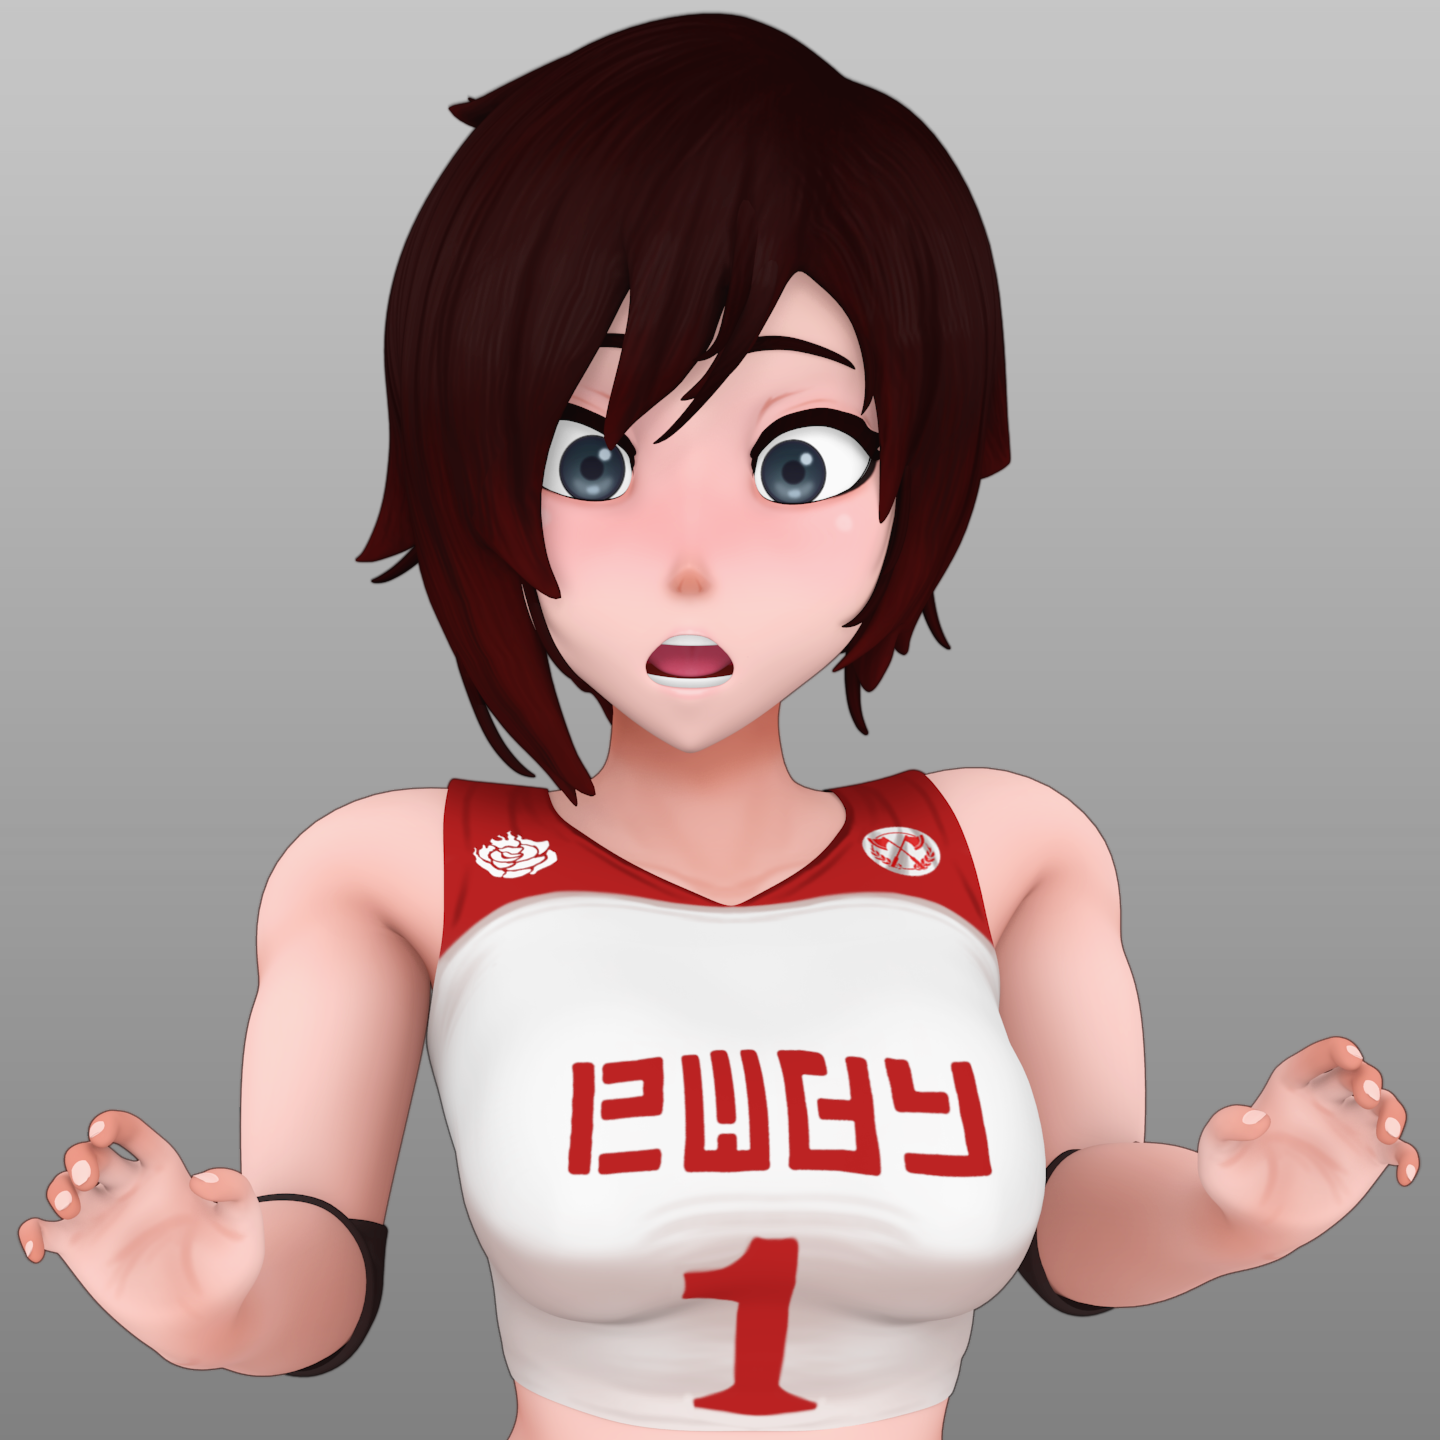 Ruby's. RWBY от jlullaby. Jlullaby RWBY. Jlullaby комиксы. Jlullaby Ruby's Workout.